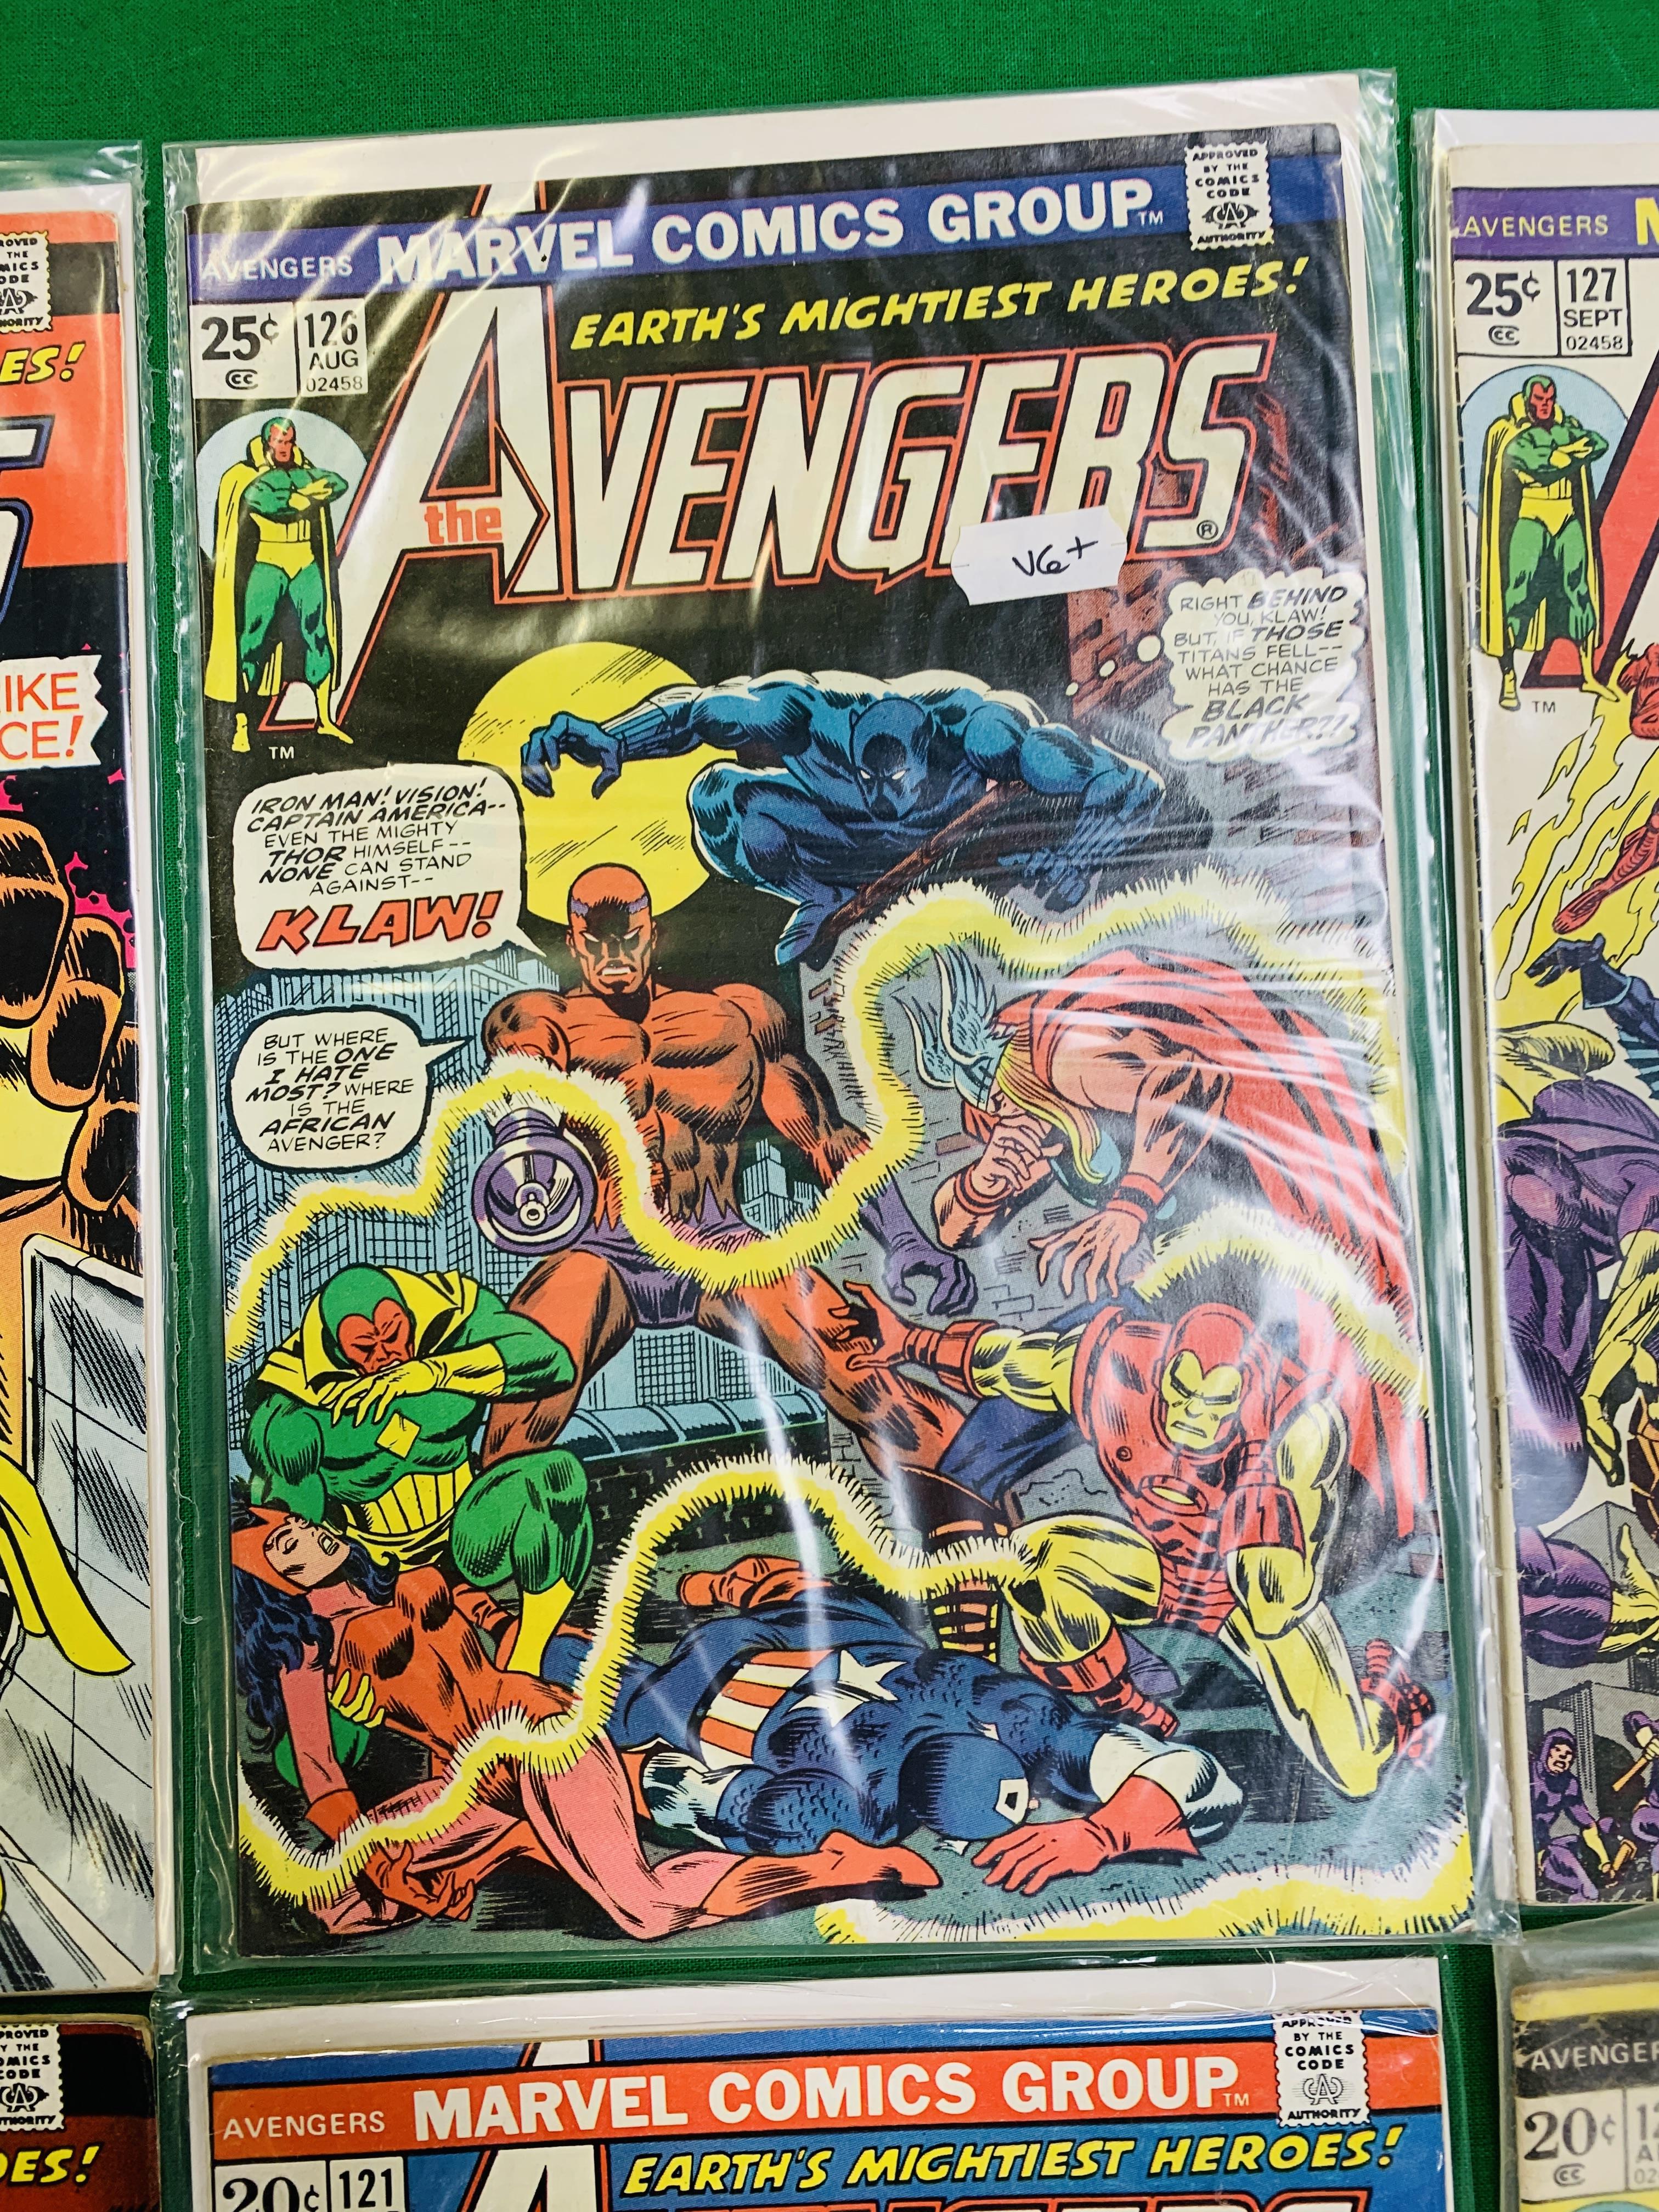 MARVEL COMICS THE AVENGERS NO. 101 - 299, MISSING ISSUES 103 AND 110. - Image 15 of 130